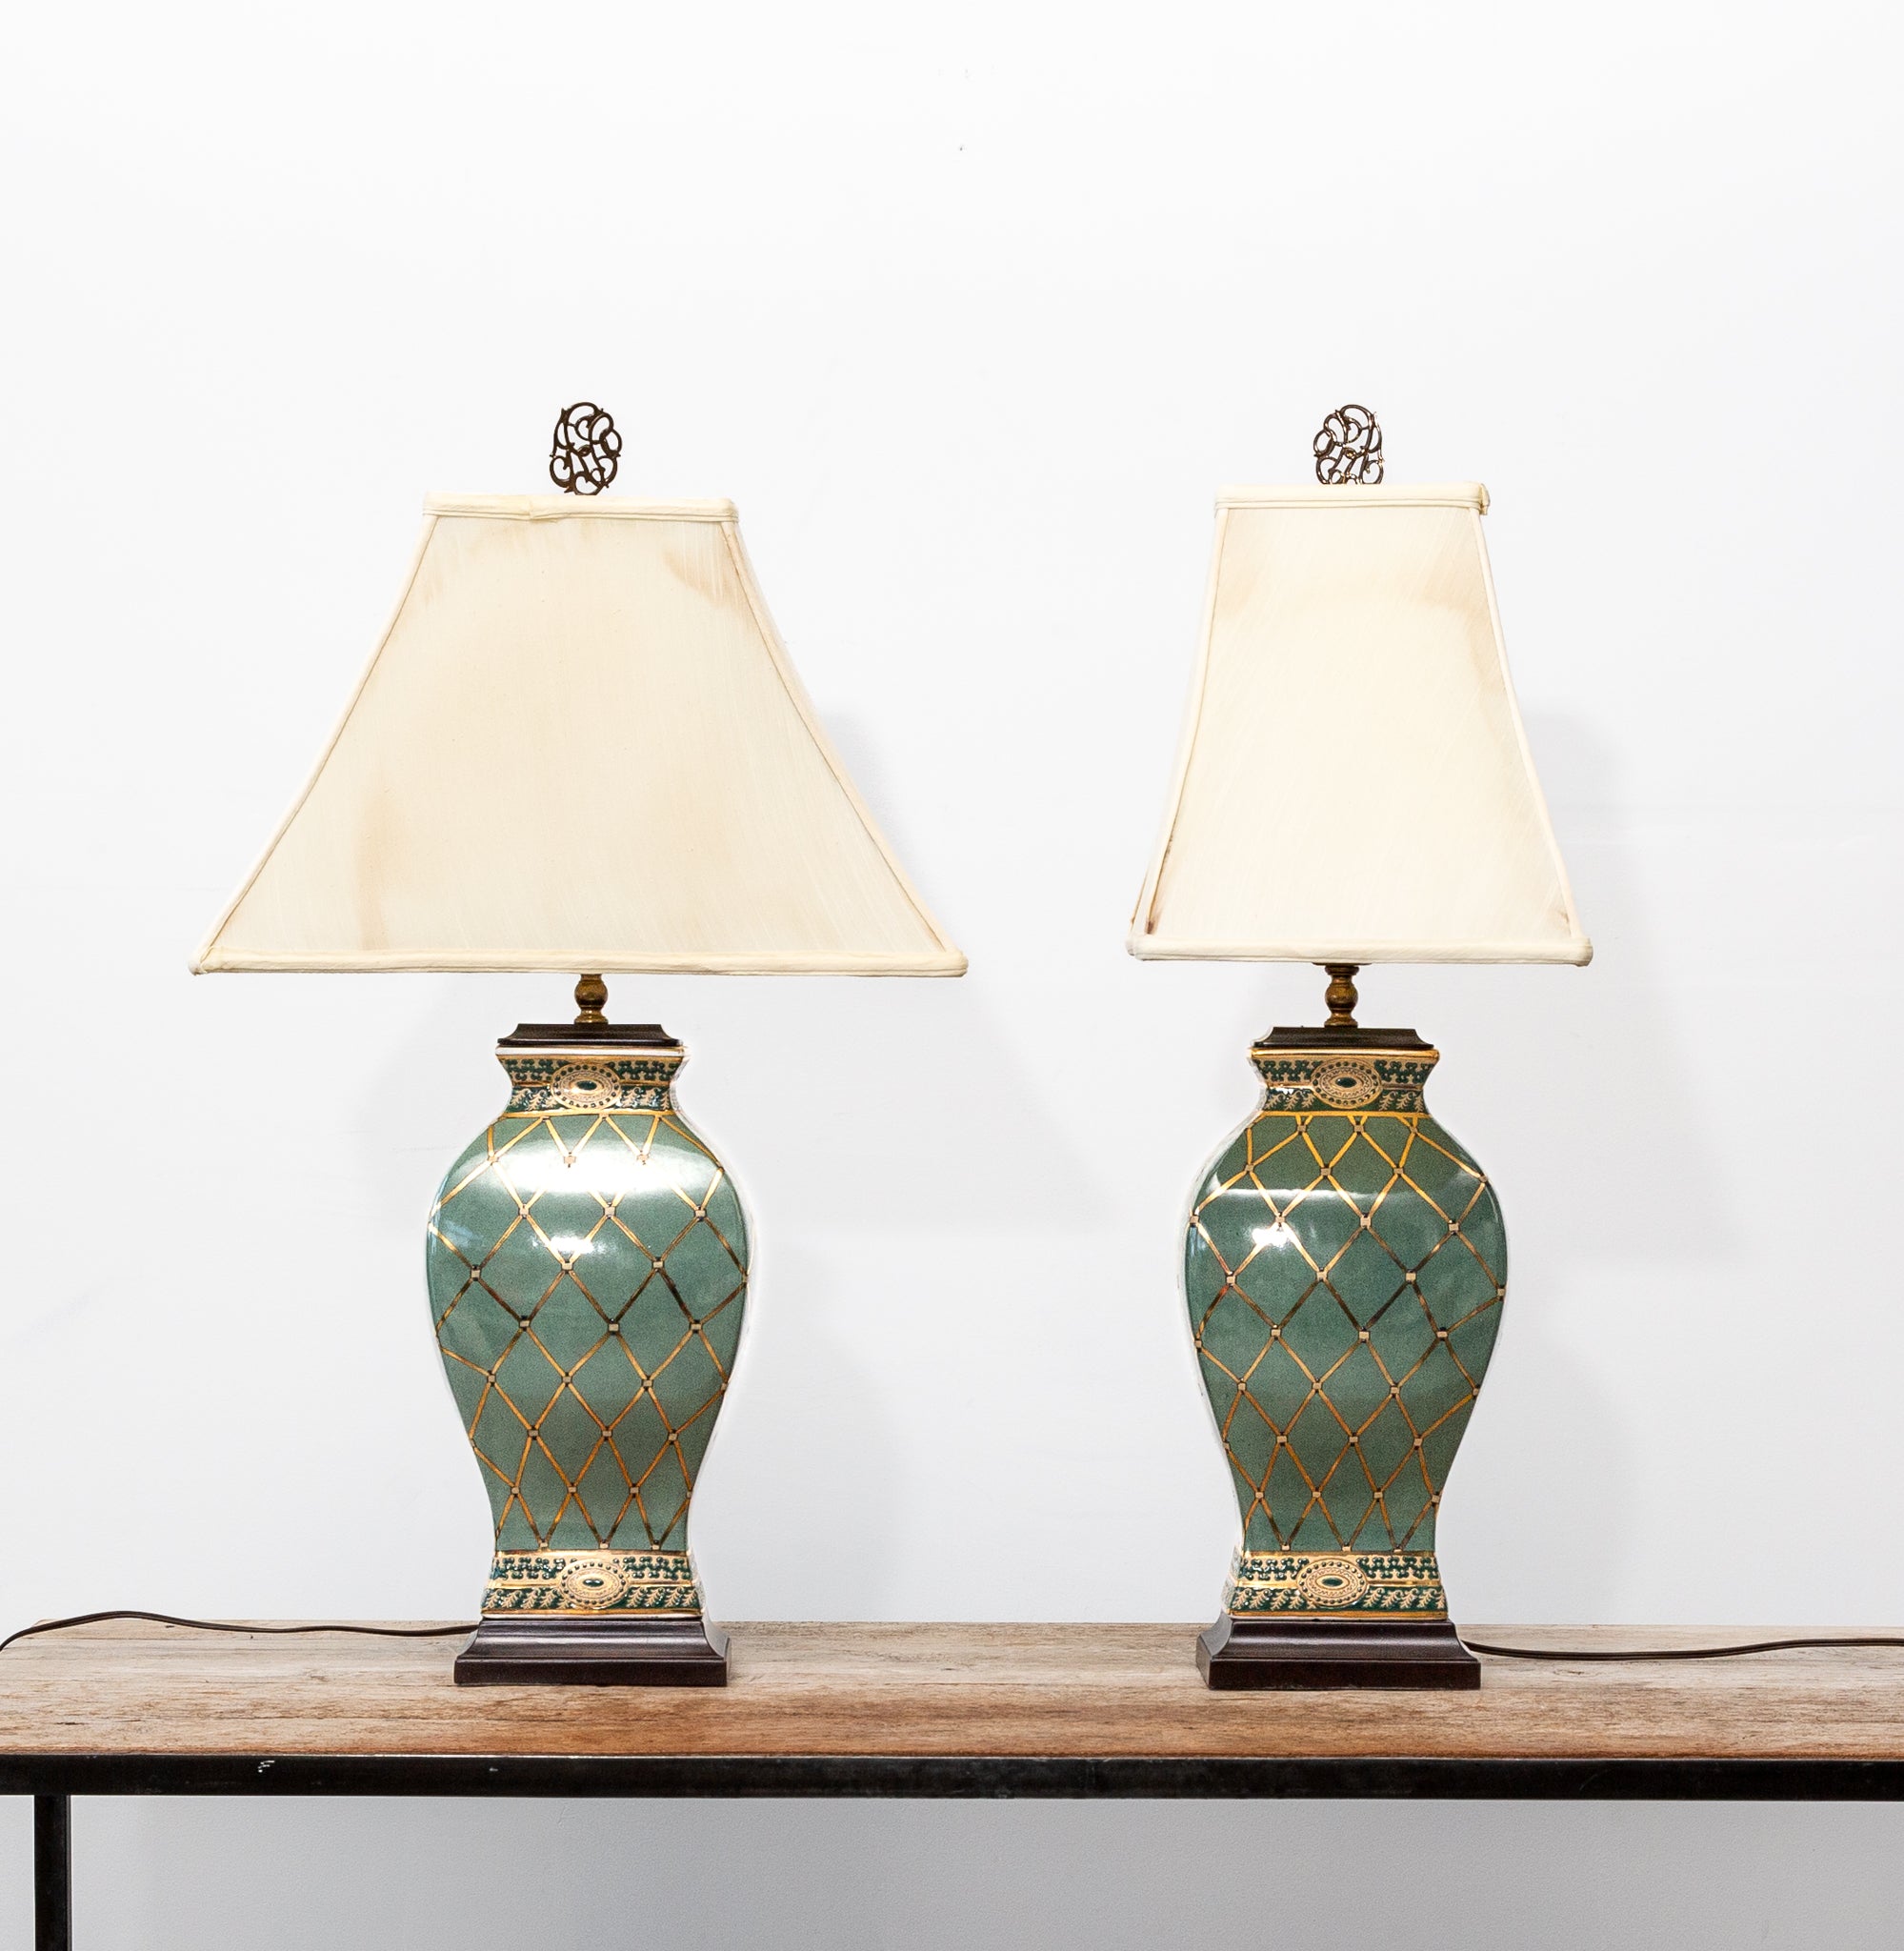 Pair of Hand-painted Ceramic Teal & Gold Lamps